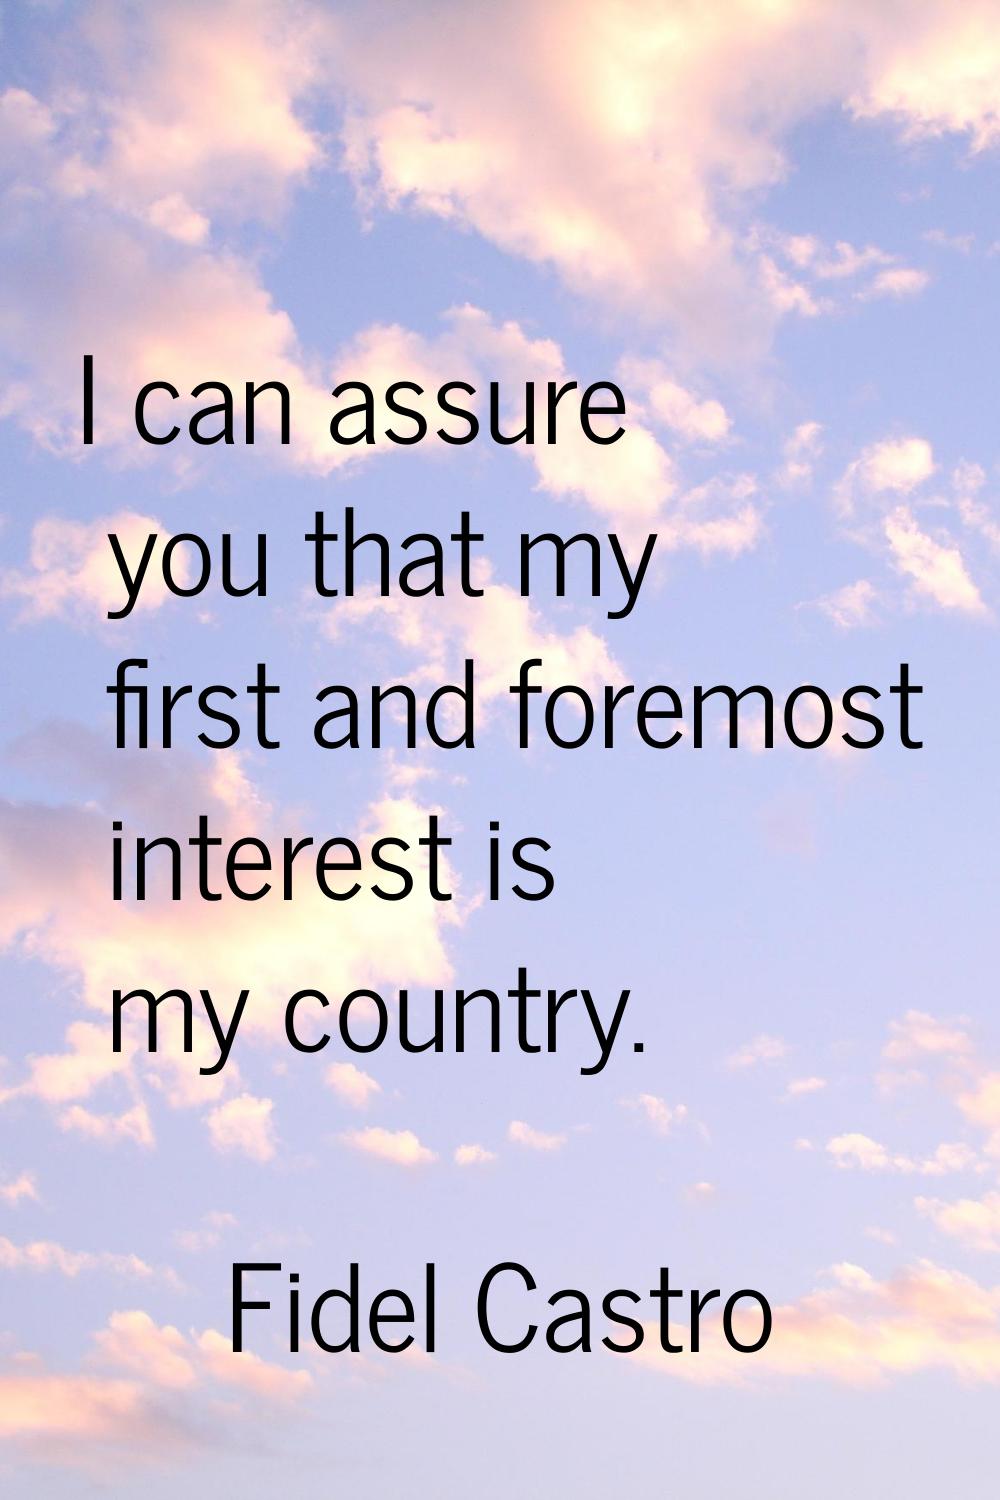 I can assure you that my first and foremost interest is my country.